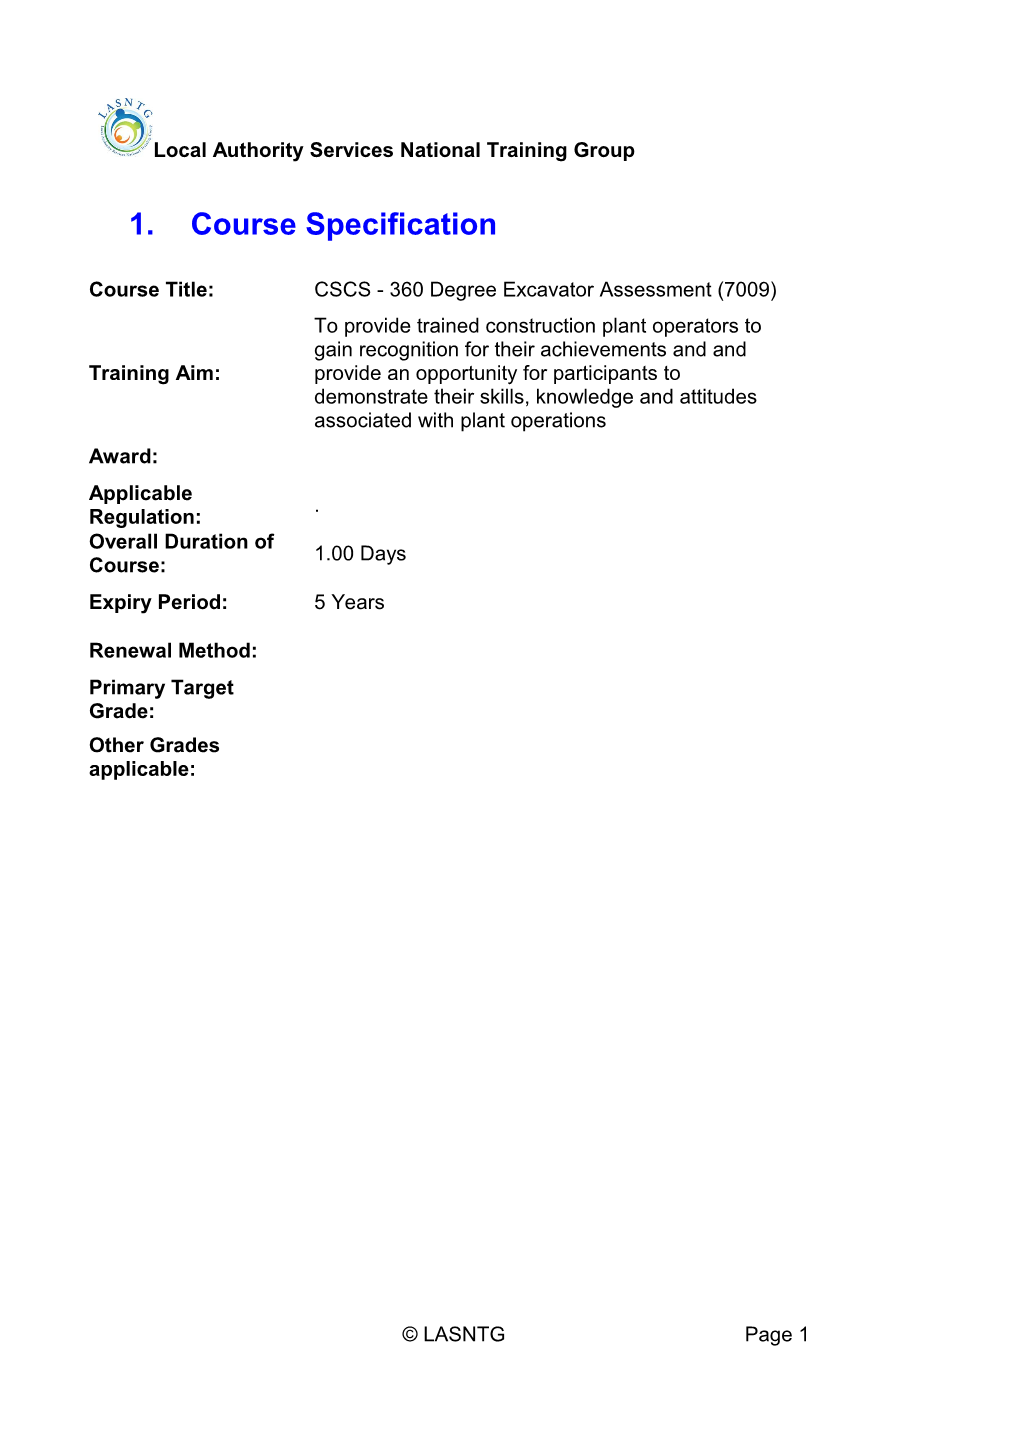 Course Specification